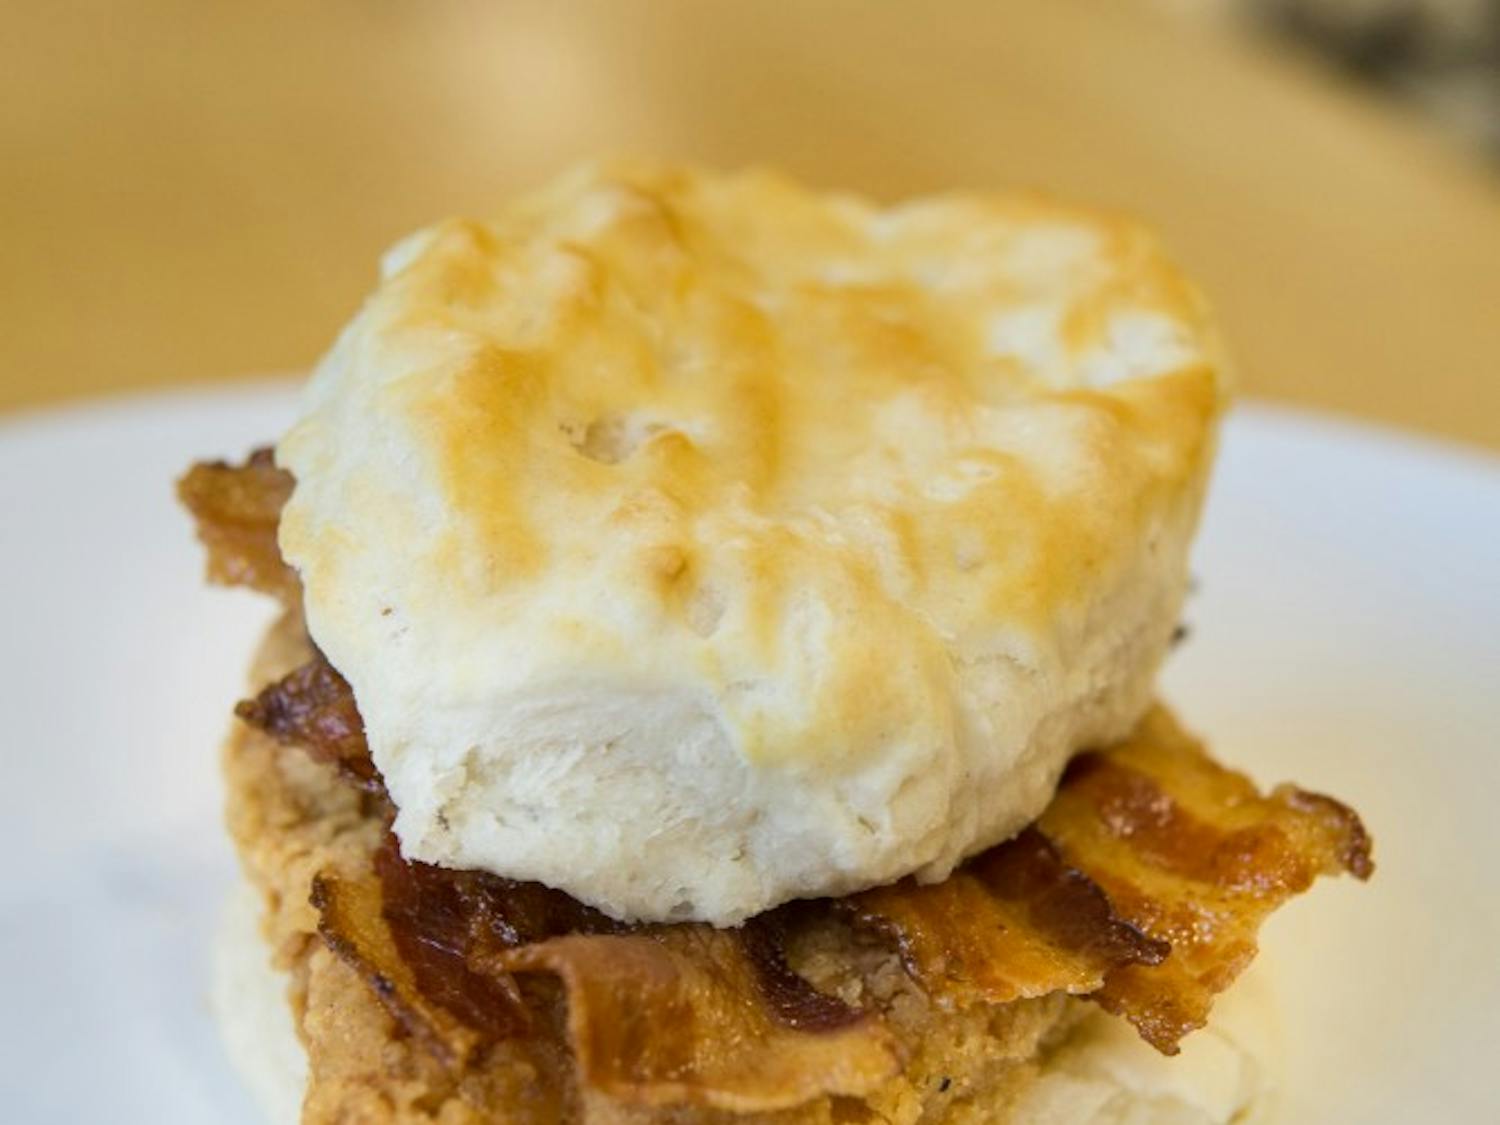 Fried chicken and bacon biscuit from Chase Dining Hall, one of two dining halls on campus. Photo taken on April 18, 2019.